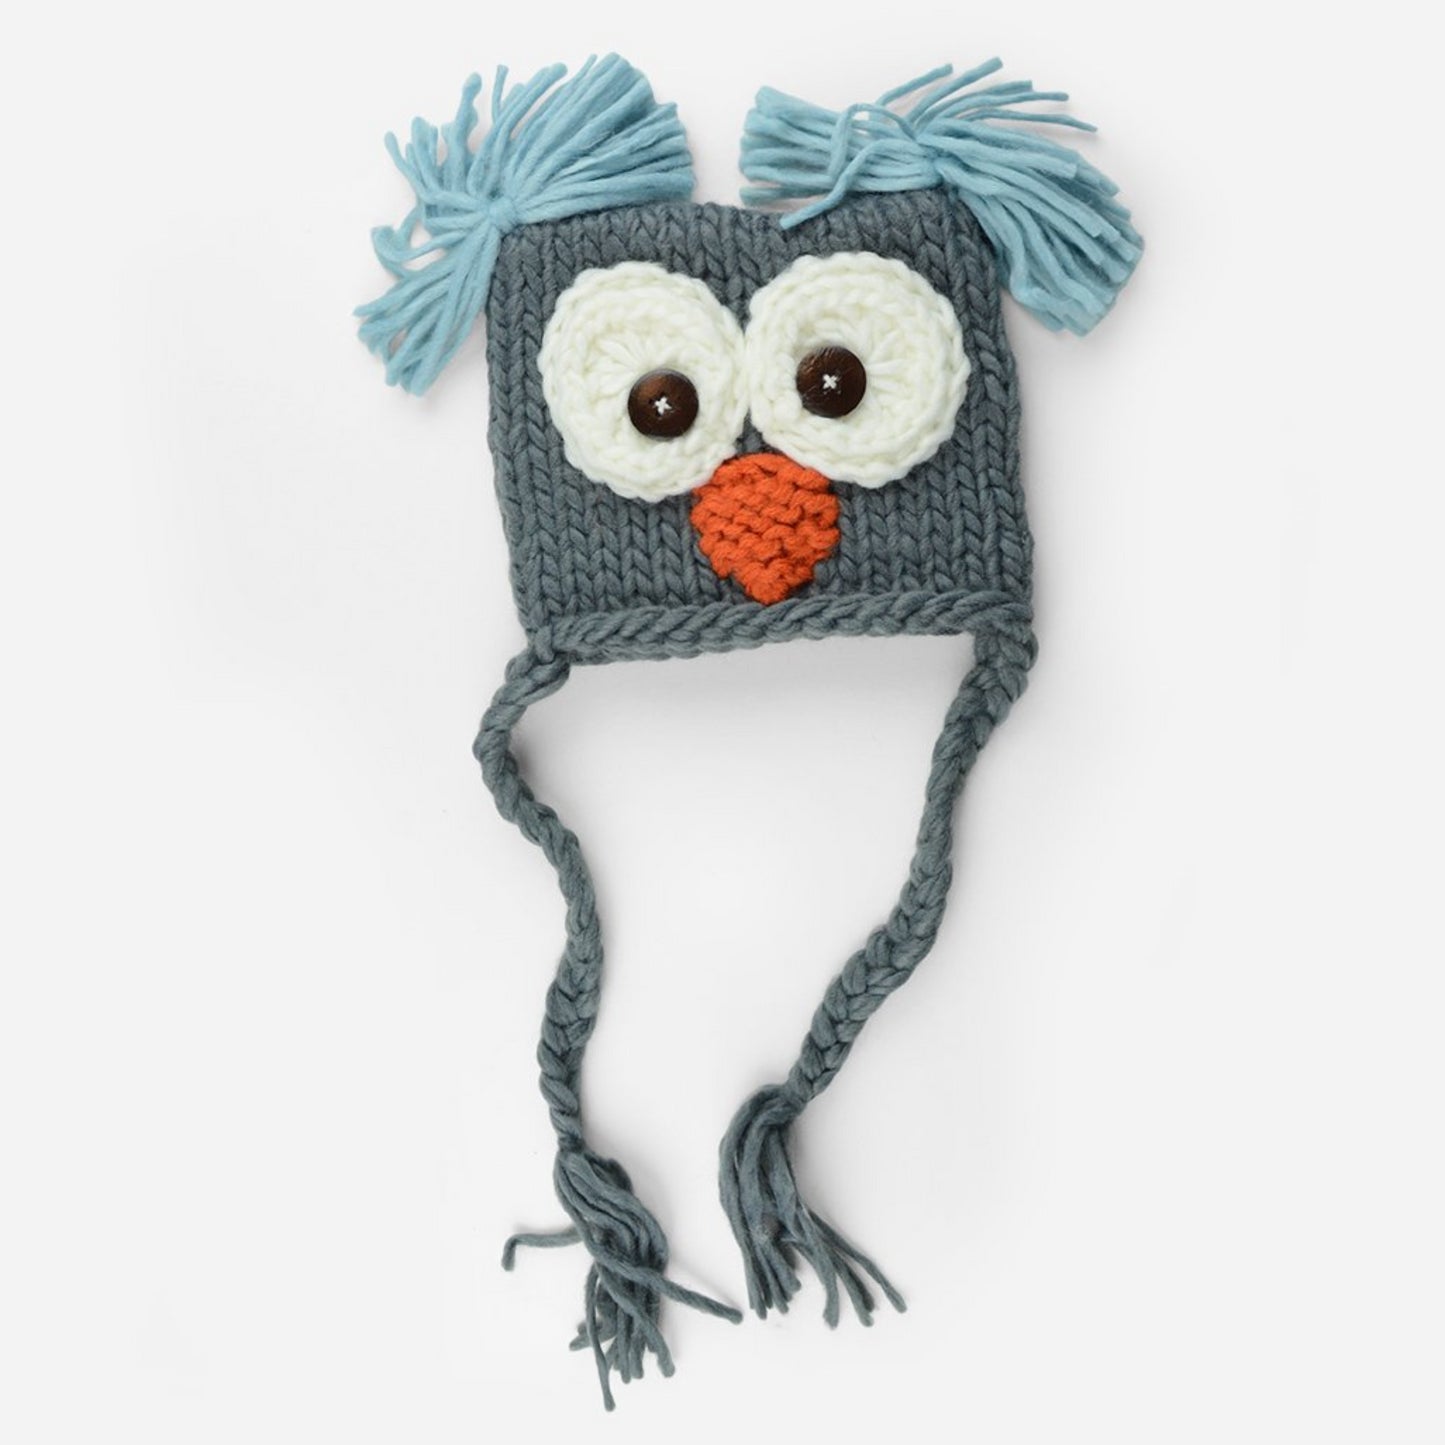 Hand Knit Owl hat with tassels and tufts in gray